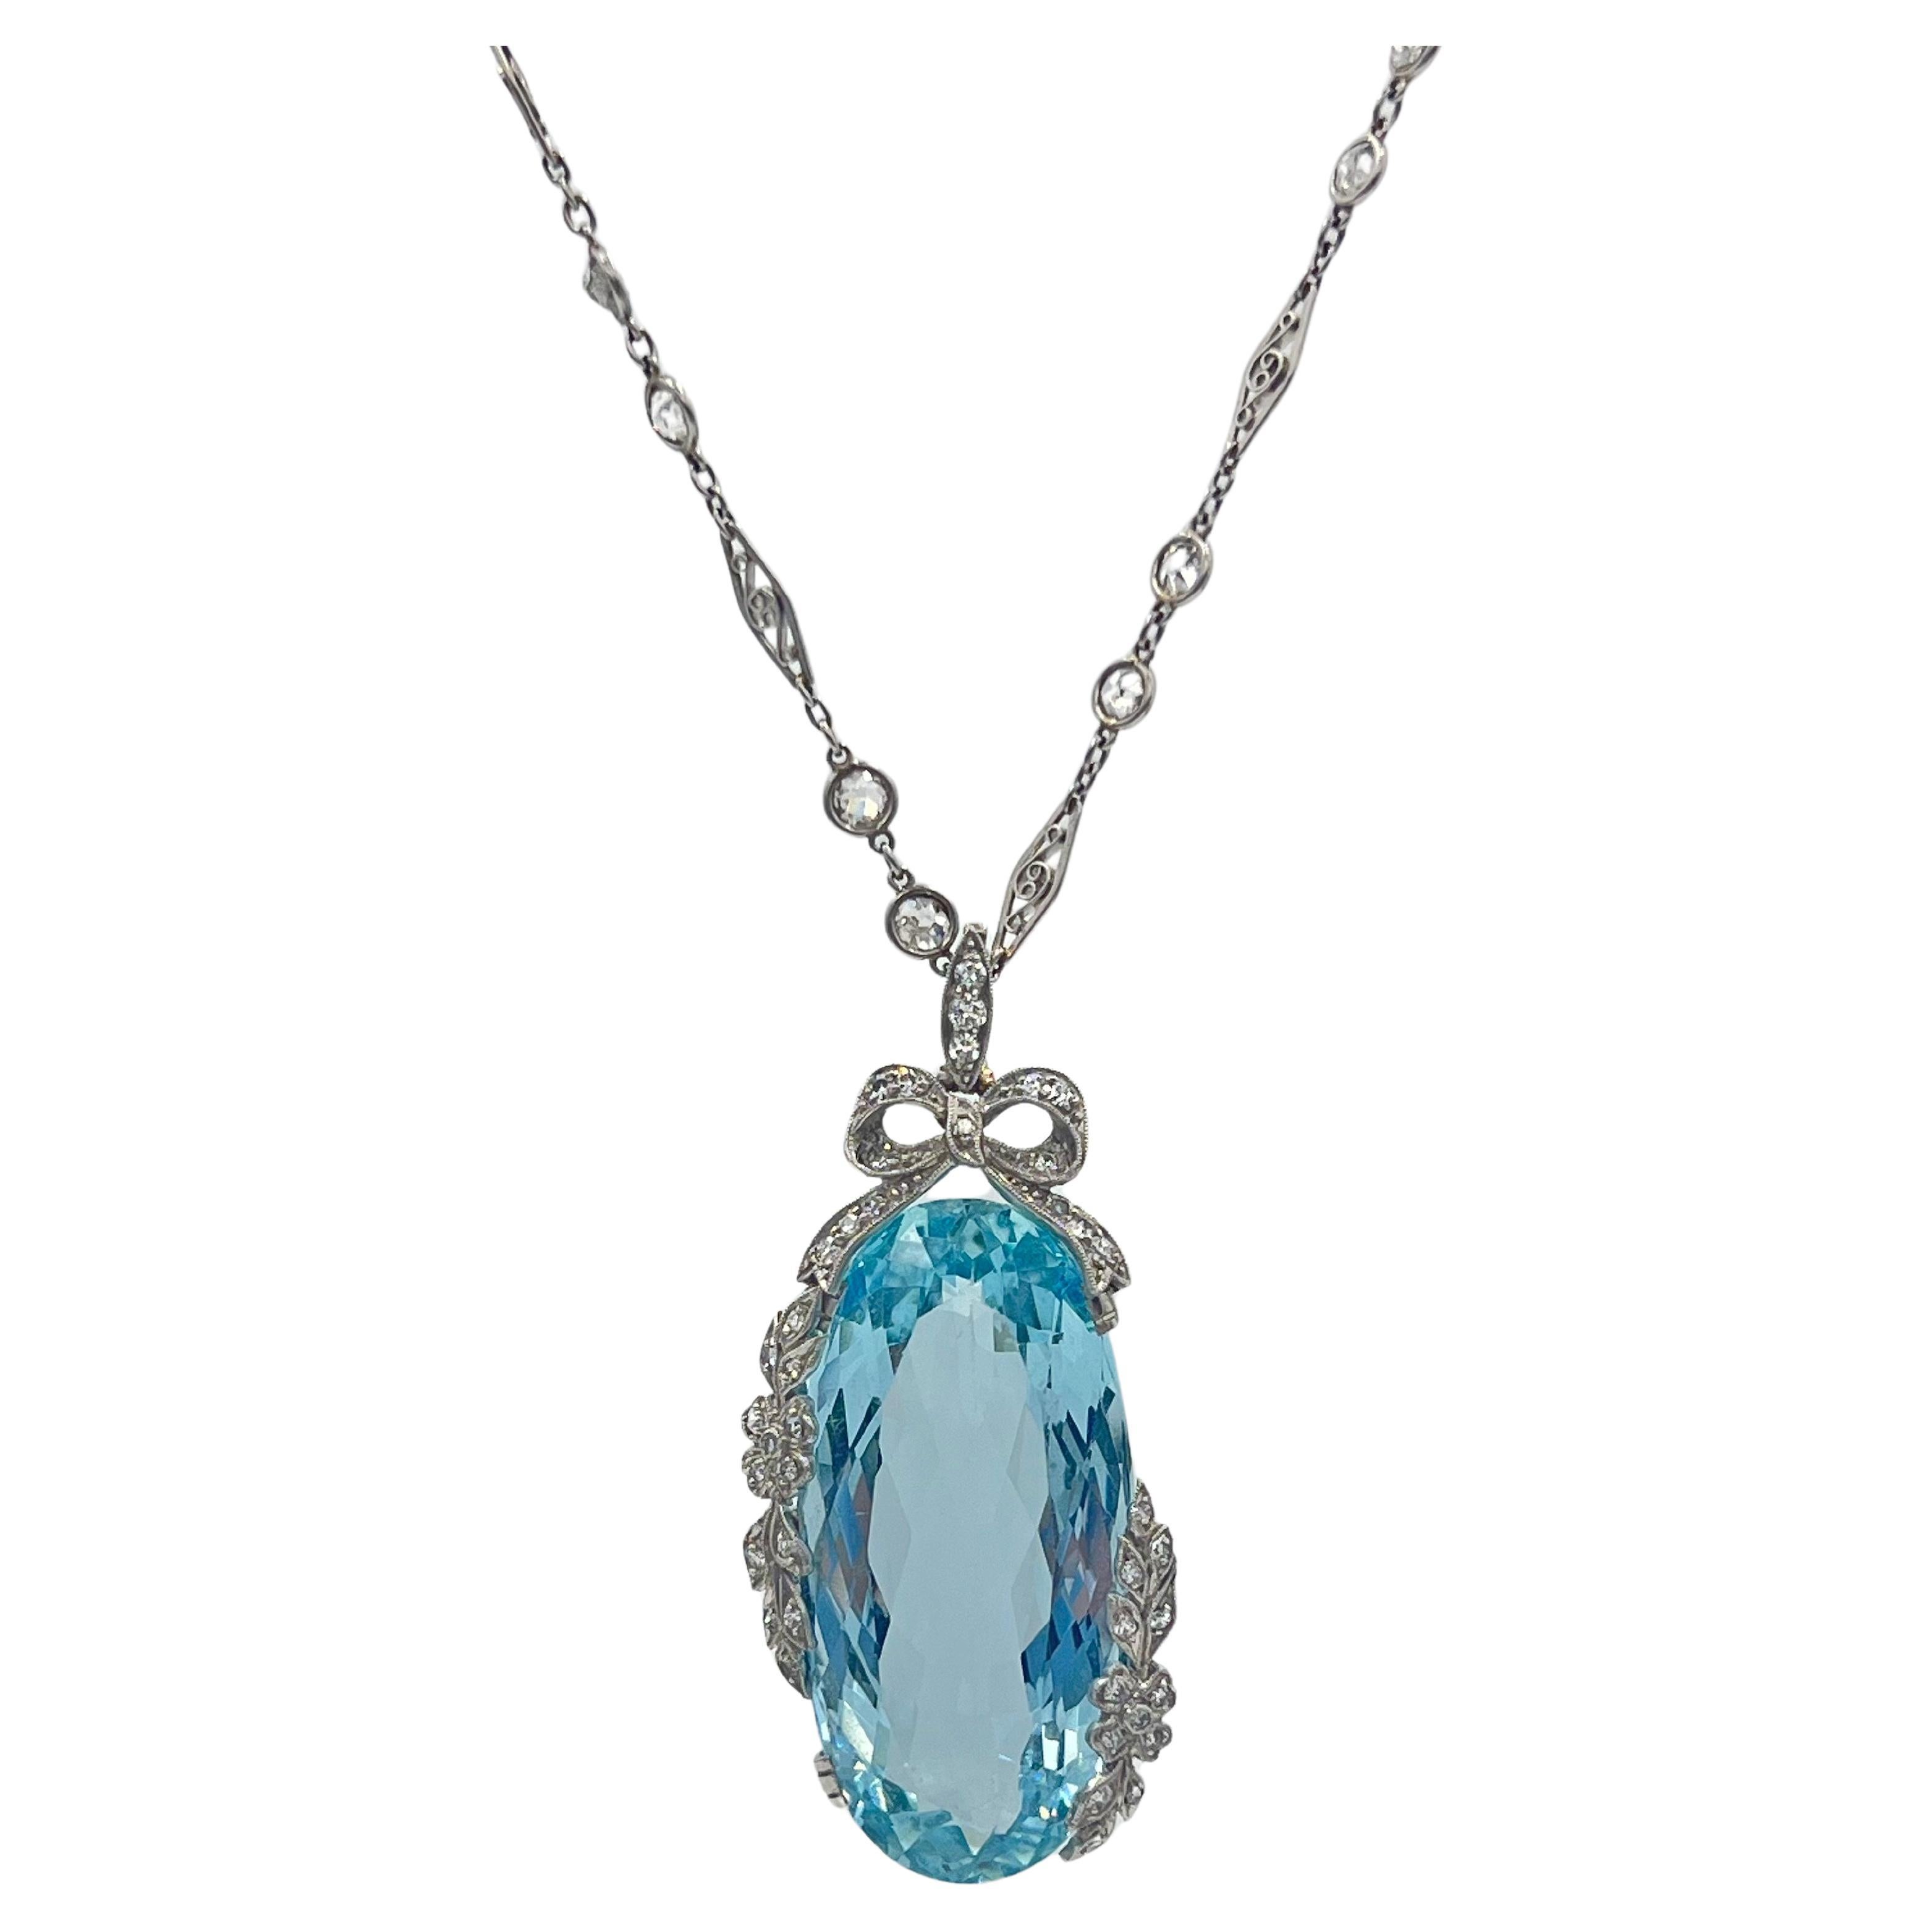 Belle Époque aquamarine and diamond pendant in a handcrafted platinum mounting, featuring an elongated oval-shaped faceted aquamarine weighing over 34 carats with a circular-cut diamond-set bow surmount and circular-cut diamond-set garland leaf